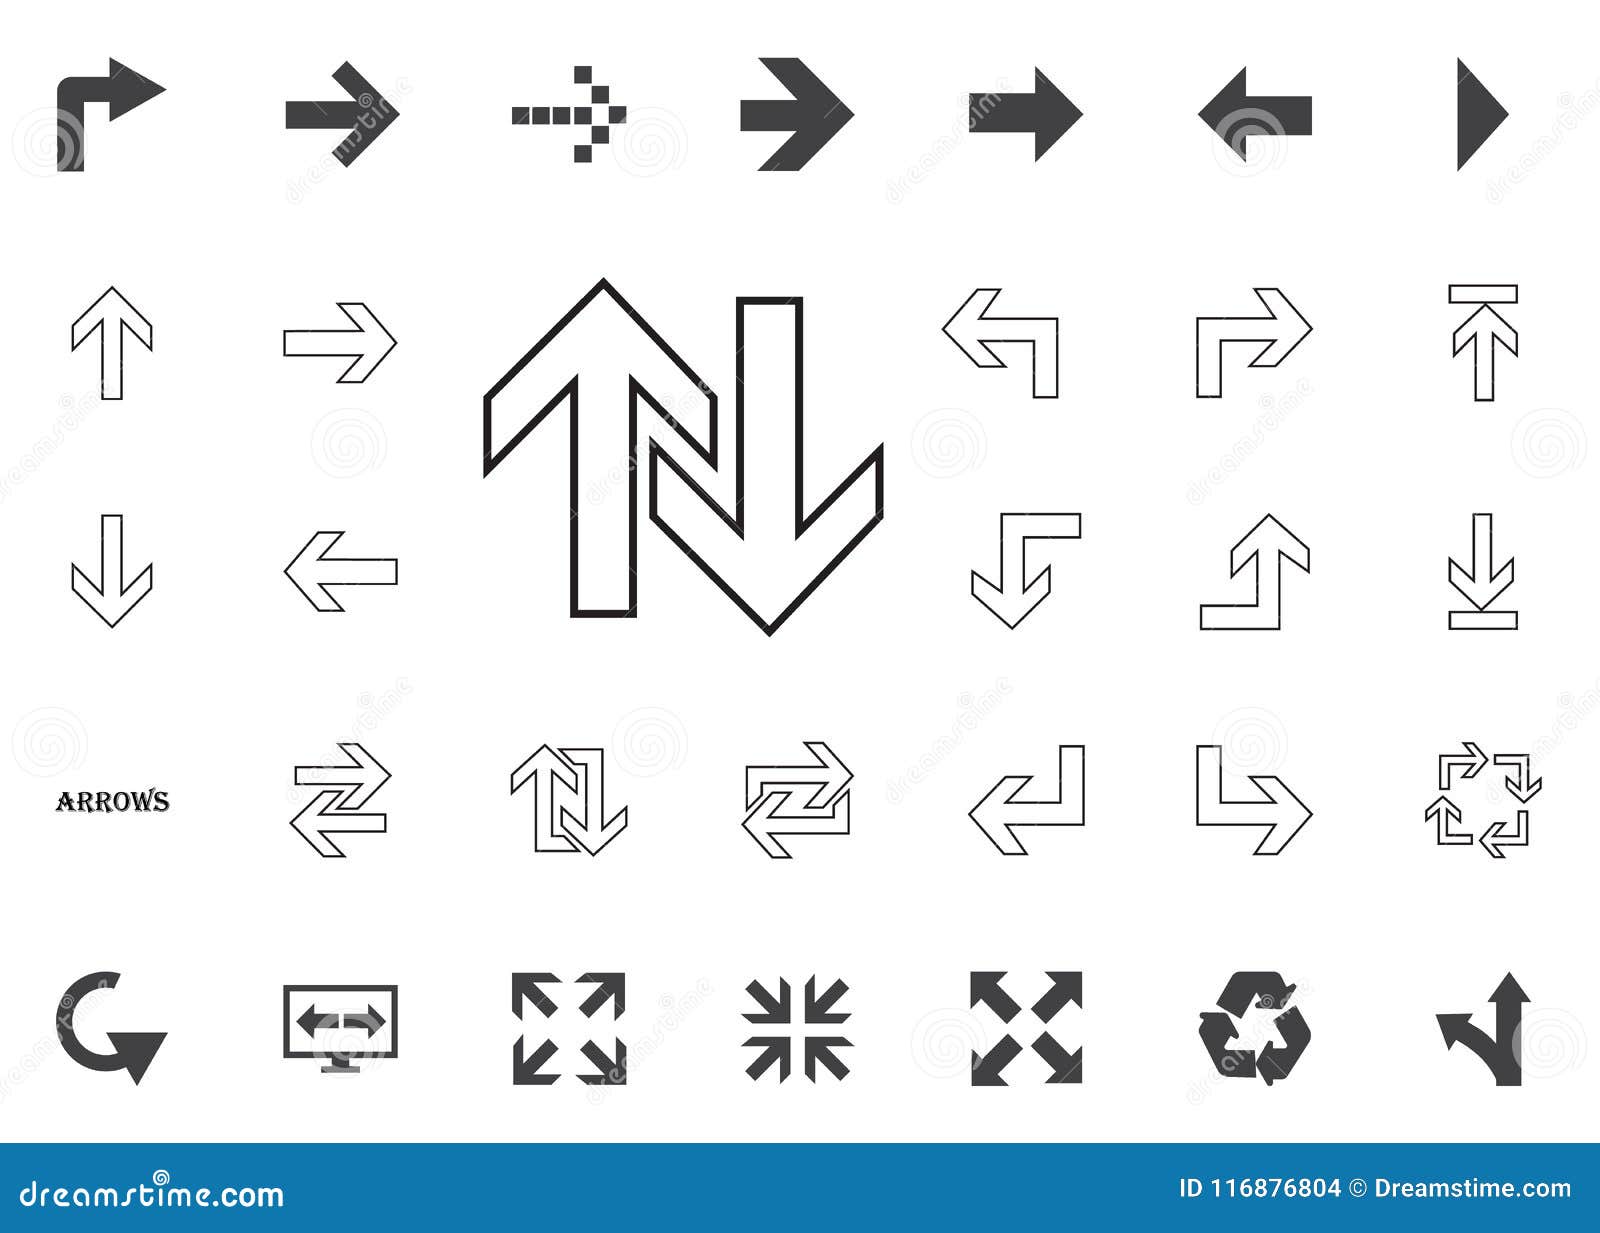 Up And Down Arrows Icon Arrow Illustration Icons Set Stock Illustration Illustration Of Abstract Growth